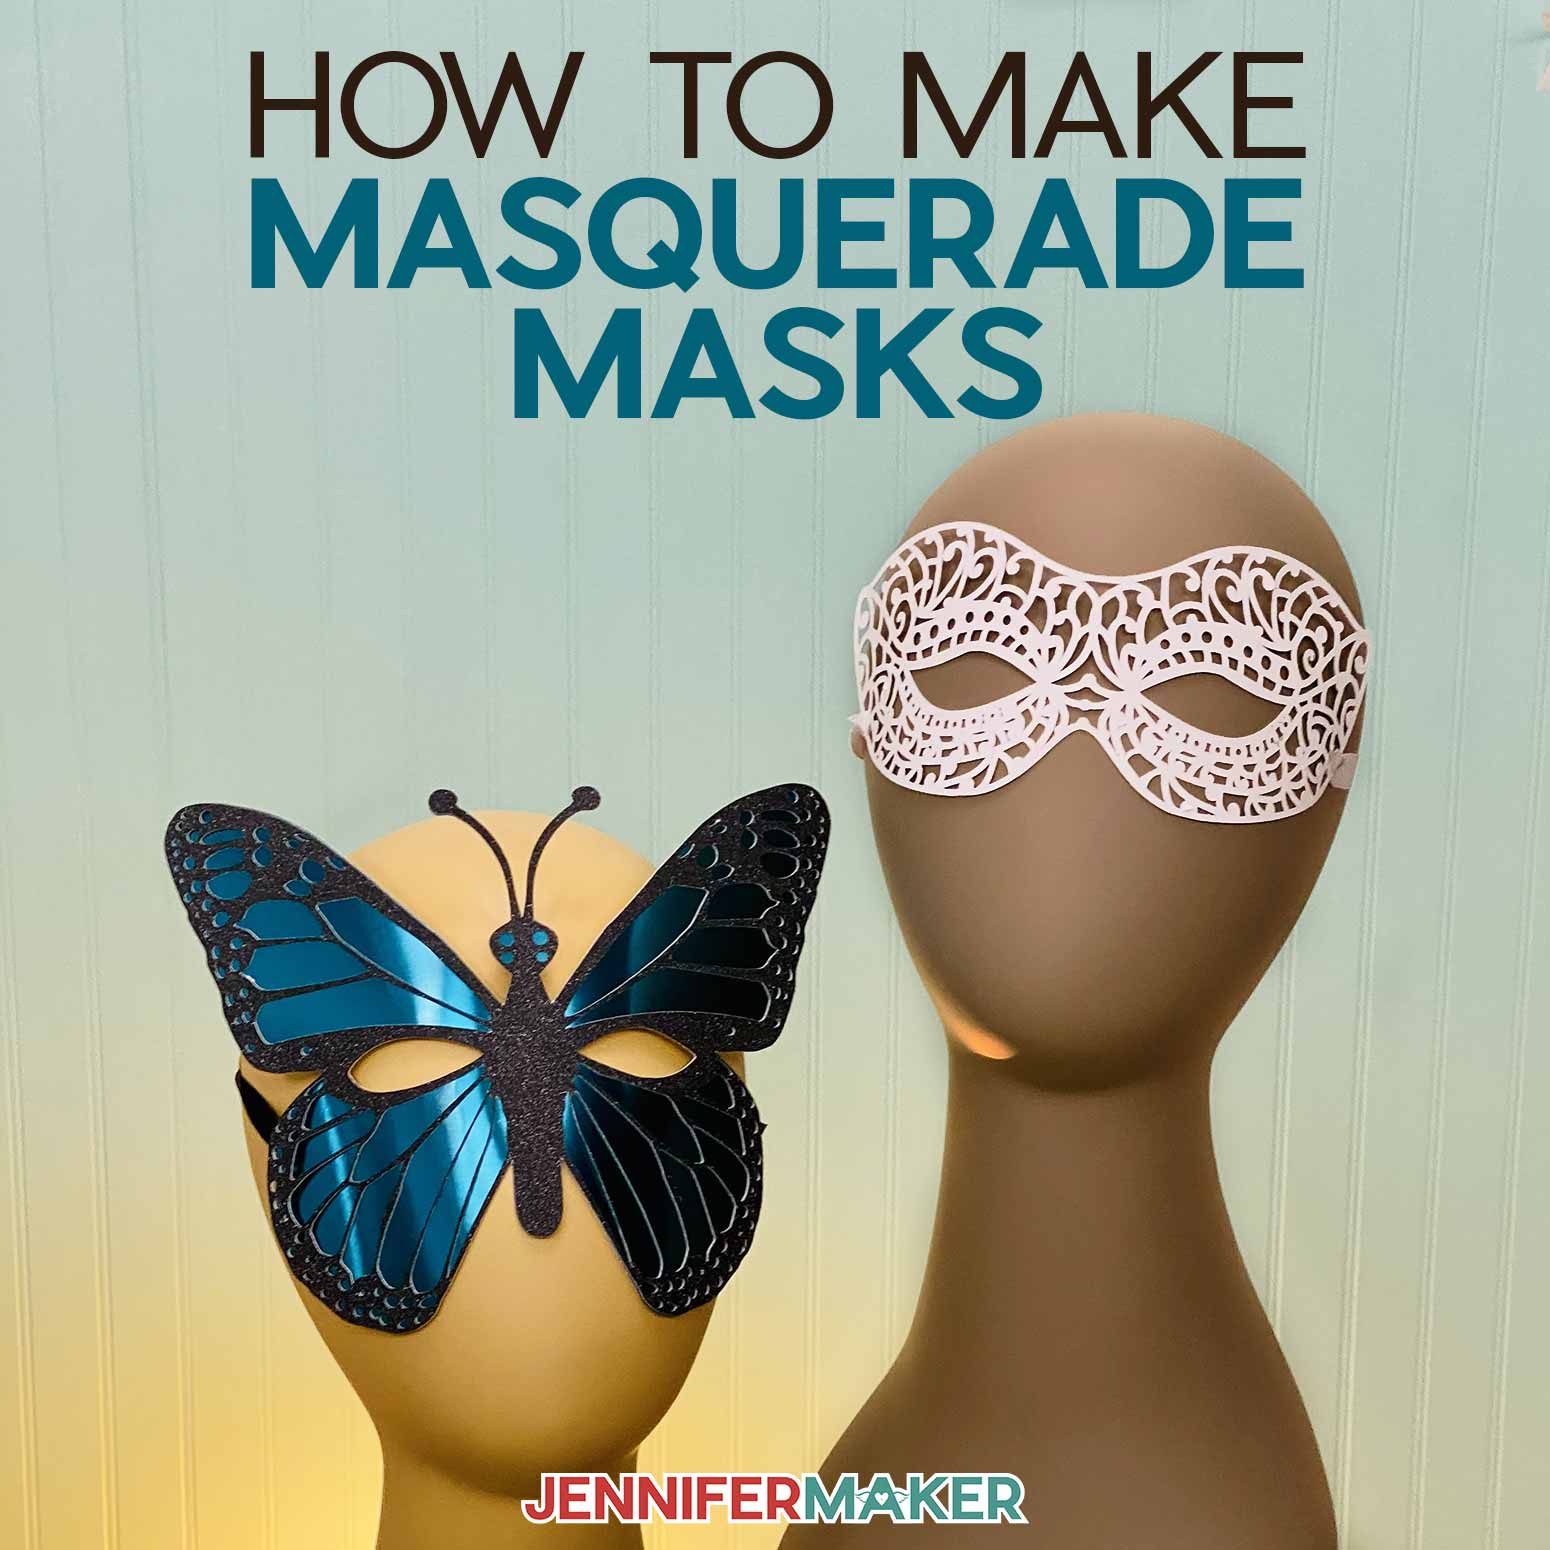 DIY Masquerade Masks with a blue butterfly mask and a white filigree mask on manequinn heads